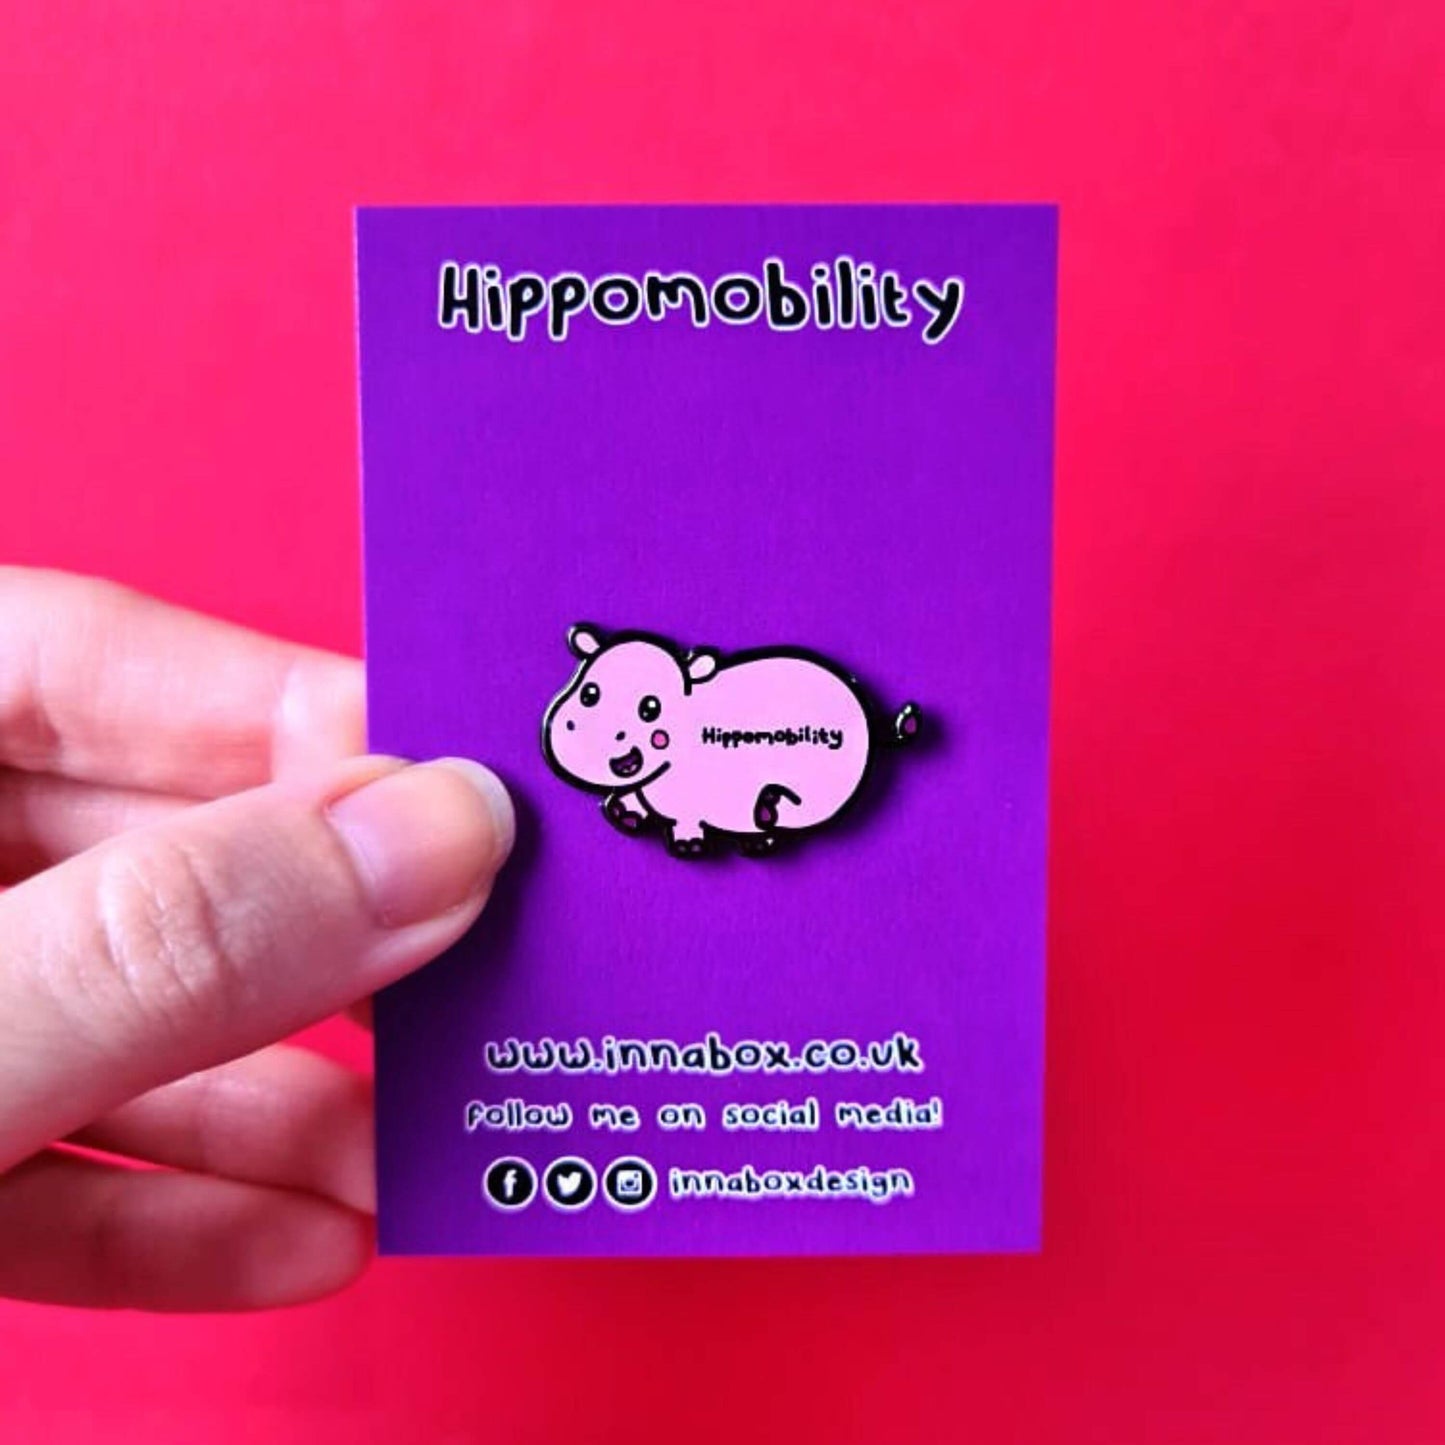 Hippmobility Enamel Pin - Hyper Mobility shown on purple backing card held in front of a red background. The enamel pin is of a pink happy hippo with the text hippomobility written on its stomach. The enamel pin is designed to raise awareness for hyper mobility